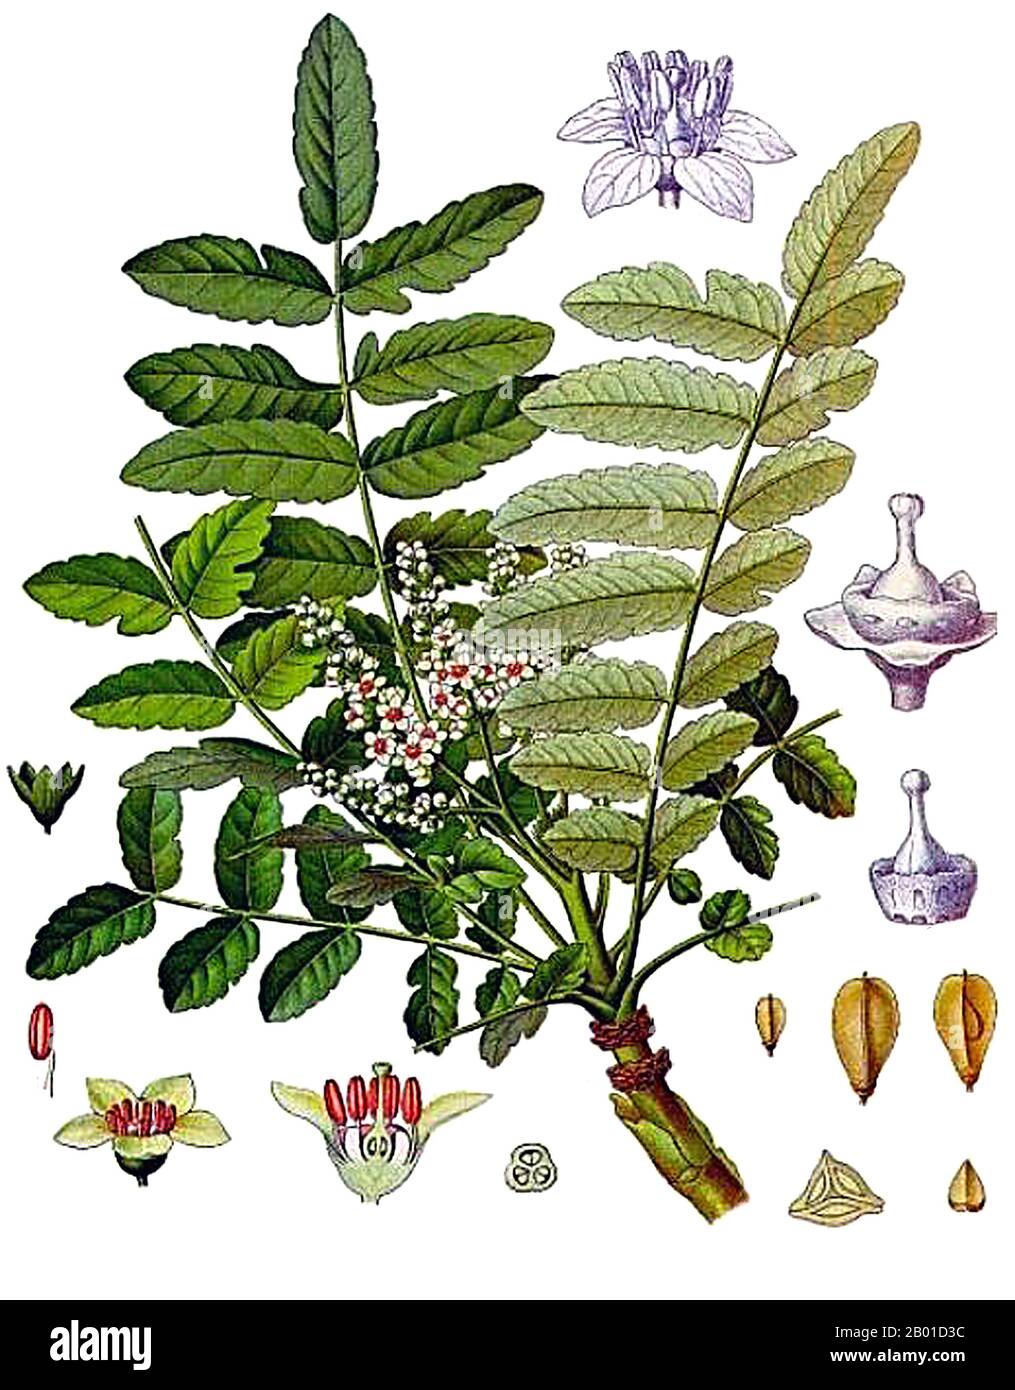 Arabia/Germany: Frankincense is an aromatic resin obtained from trees of the genus Boswellia, particularly Boswellia sacra. It is used in incense and perfumes. Illustration by Walther Otto Muller (20 June 1833 - 17 July 1887) for Hermann Adolph Köhler's 'Medizinal-Pflanzen', 1887.  Frankincense has been traded on the Arabian Peninsula and in North Africa for more than 5000 years.  A mural depicting sacks of frankincense traded from the Land of Punt adorns the walls of the temple of ancient Egyptian Queen Hatshepsut, who died in 1458 BCE. Stock Photo